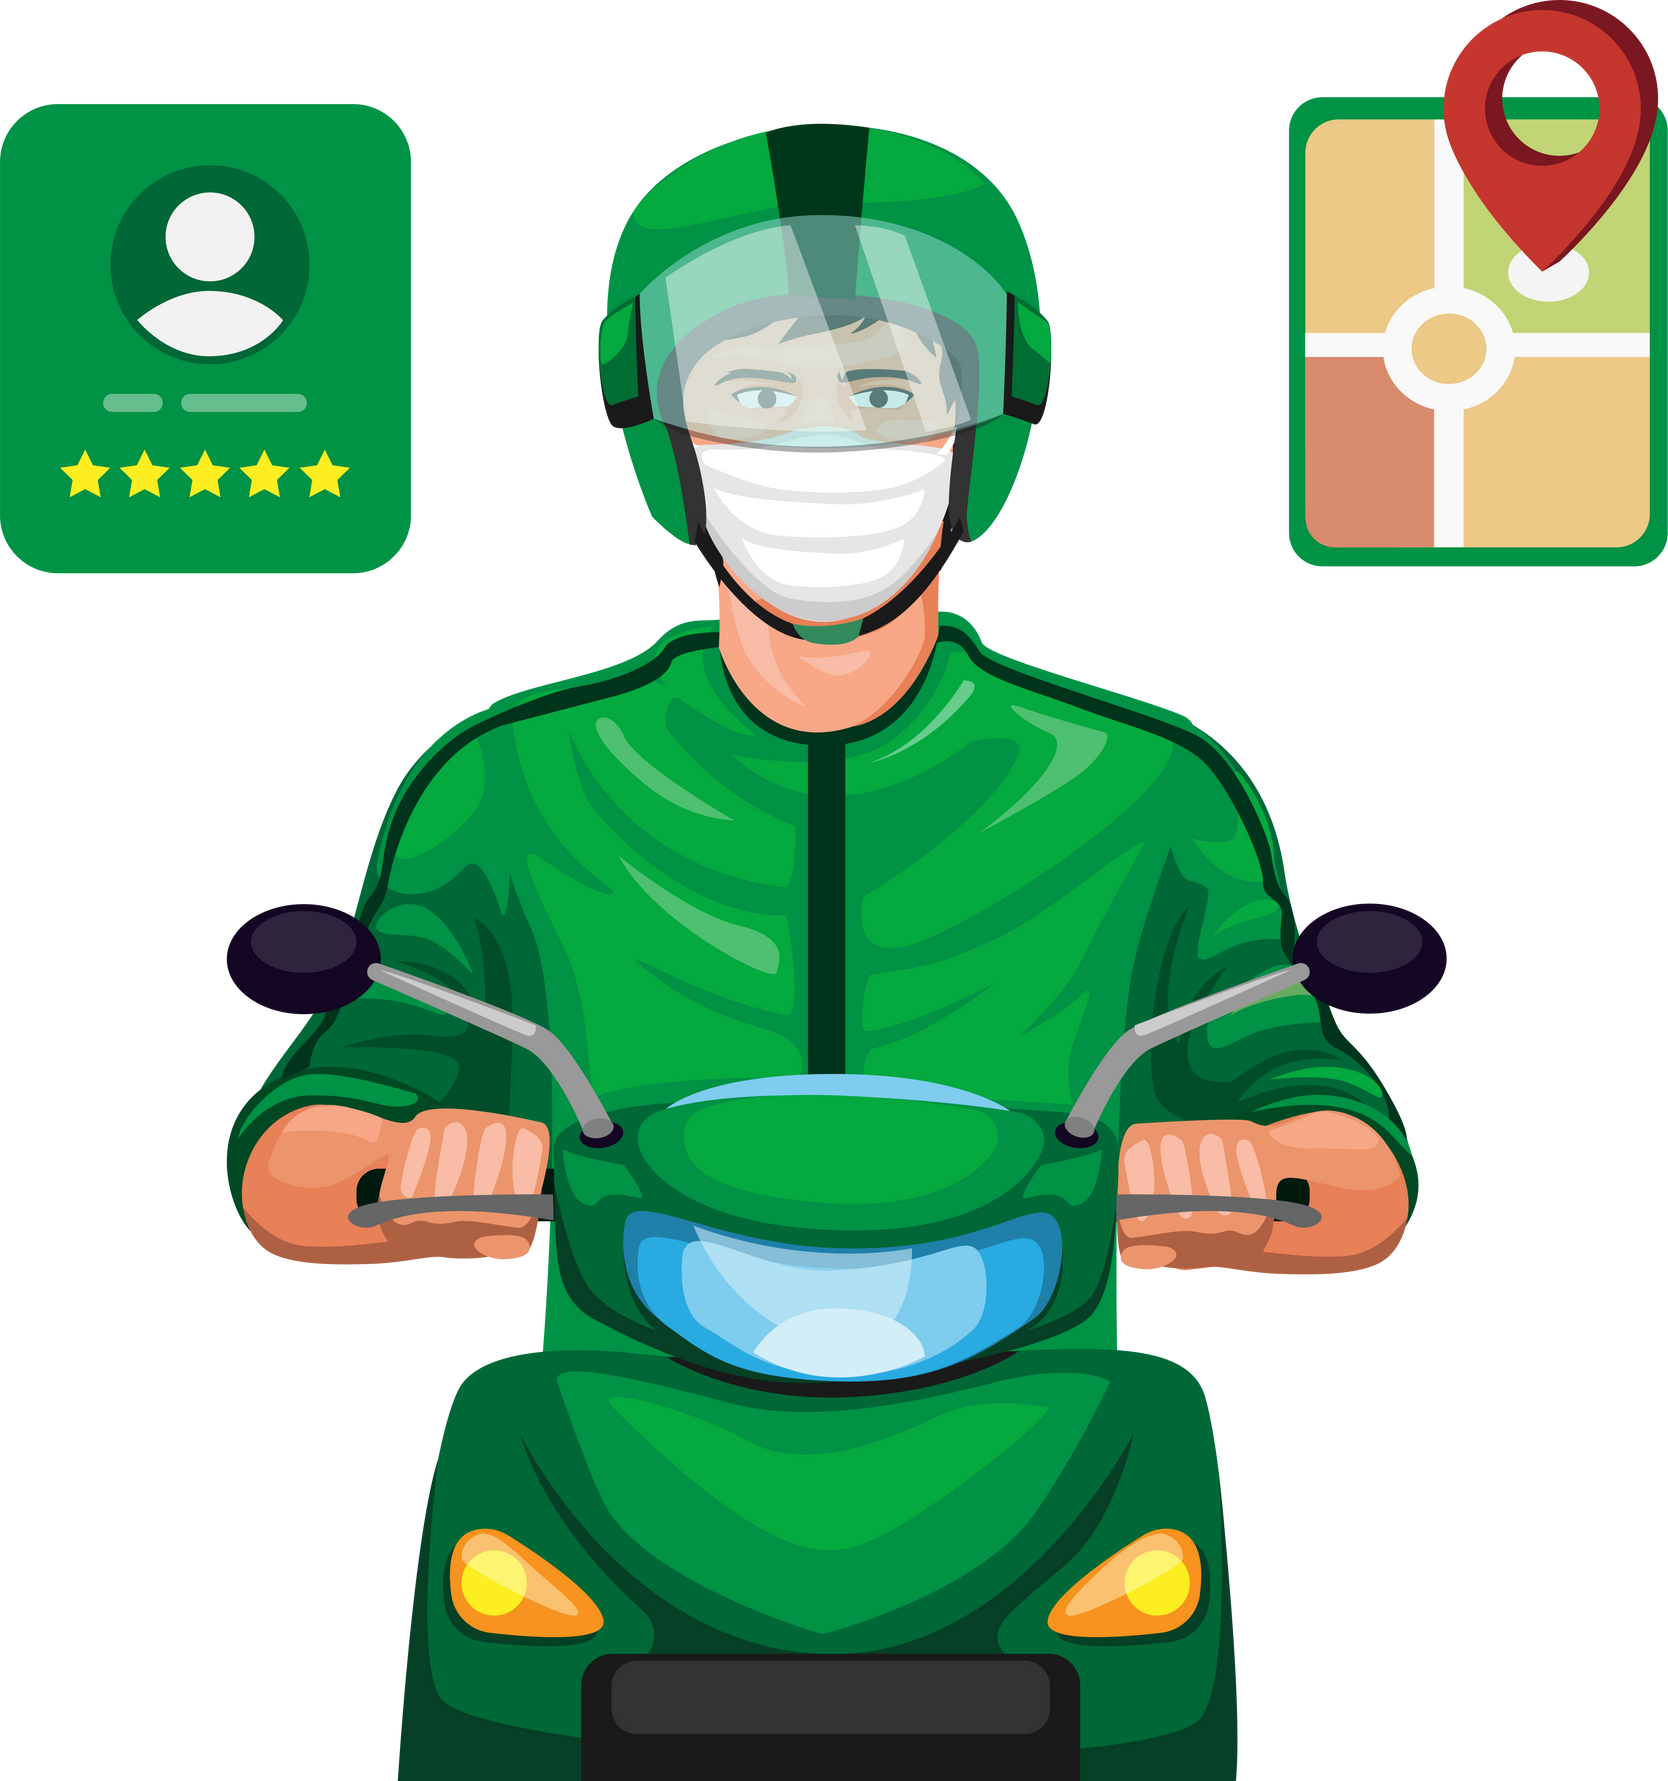 Rider motorbike taxi online with profile rating and gps symbol cartoon illustration